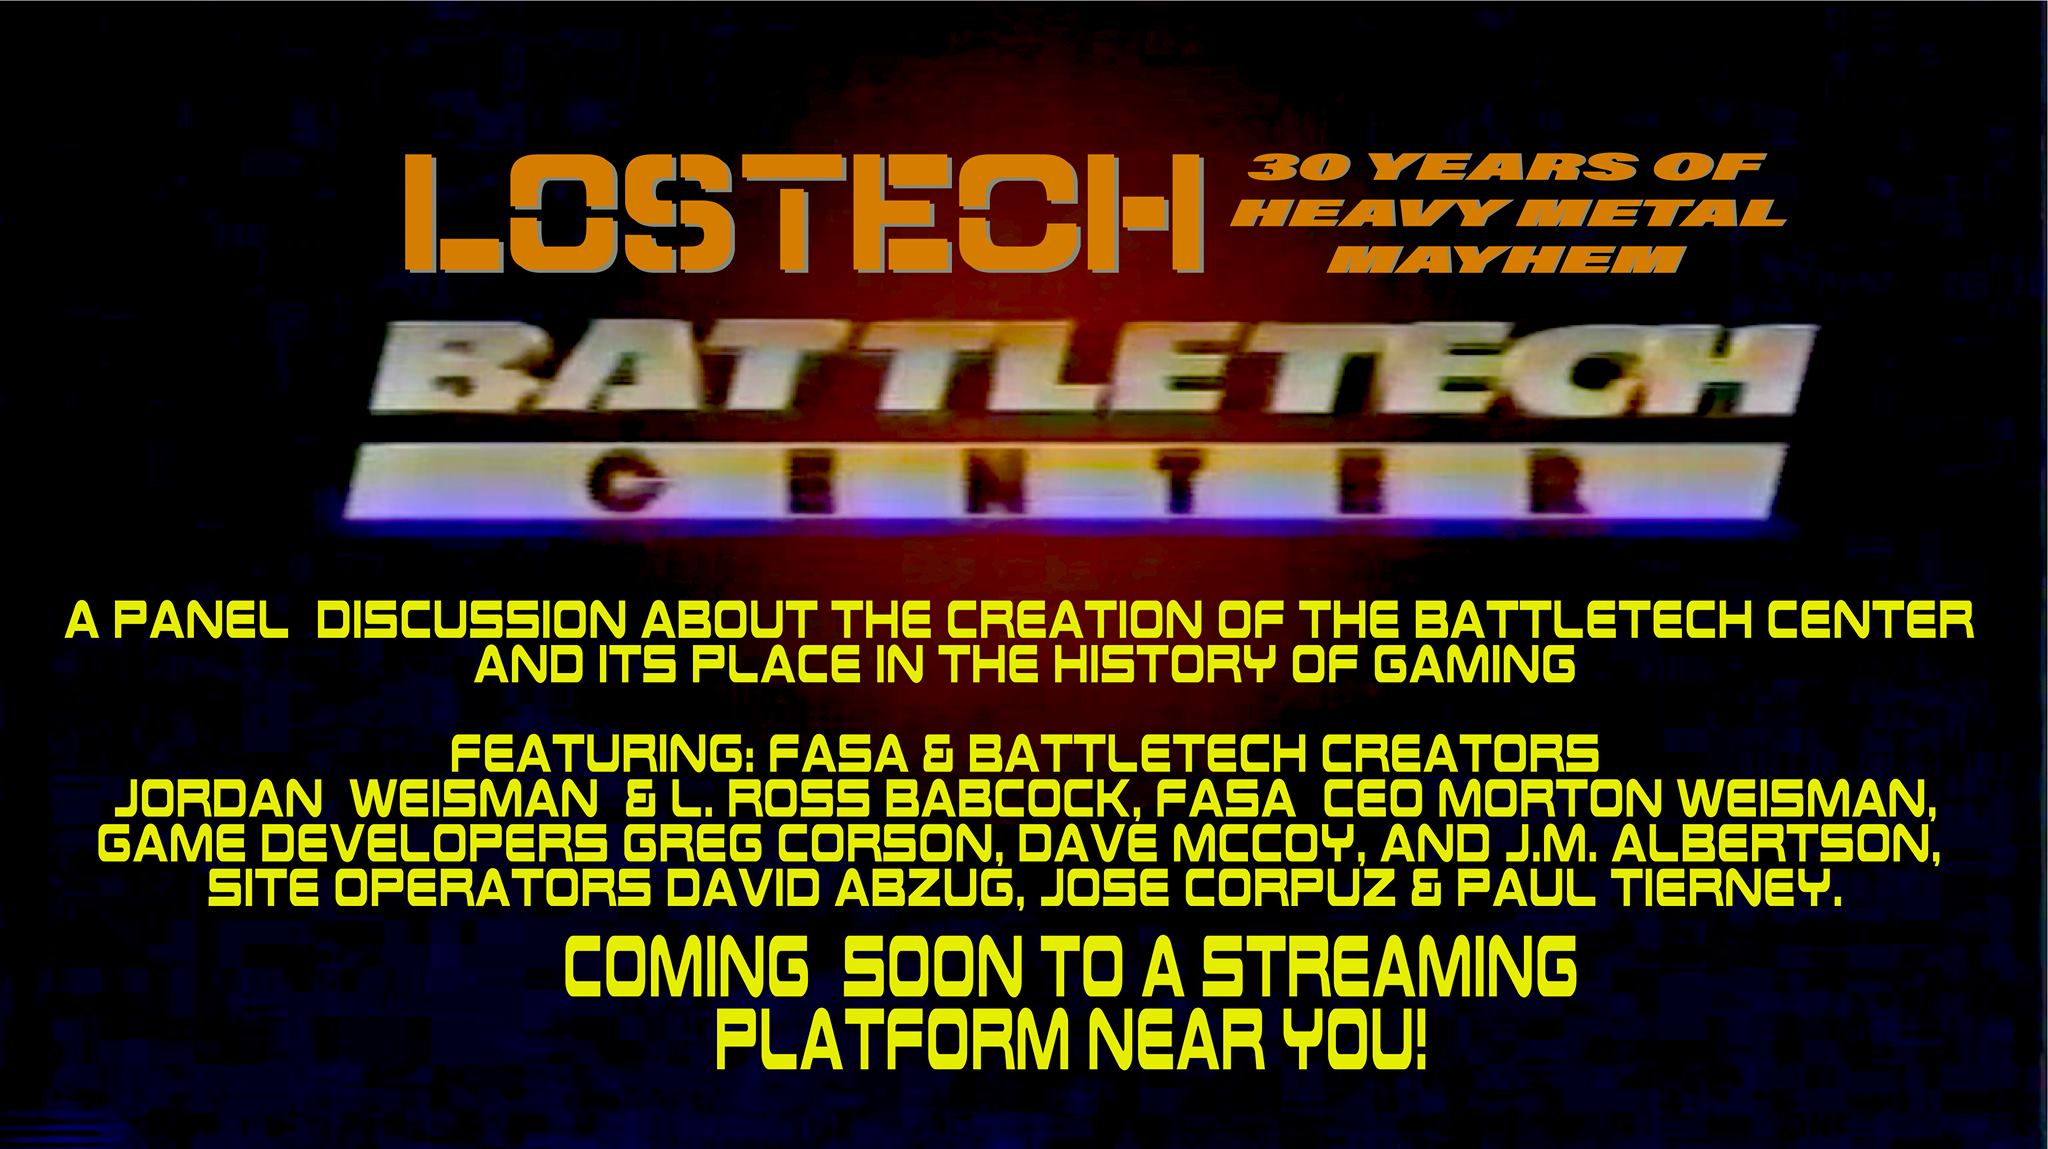 Lostech: The History of The BattleTech Center and Virtual World. Coming Soon!